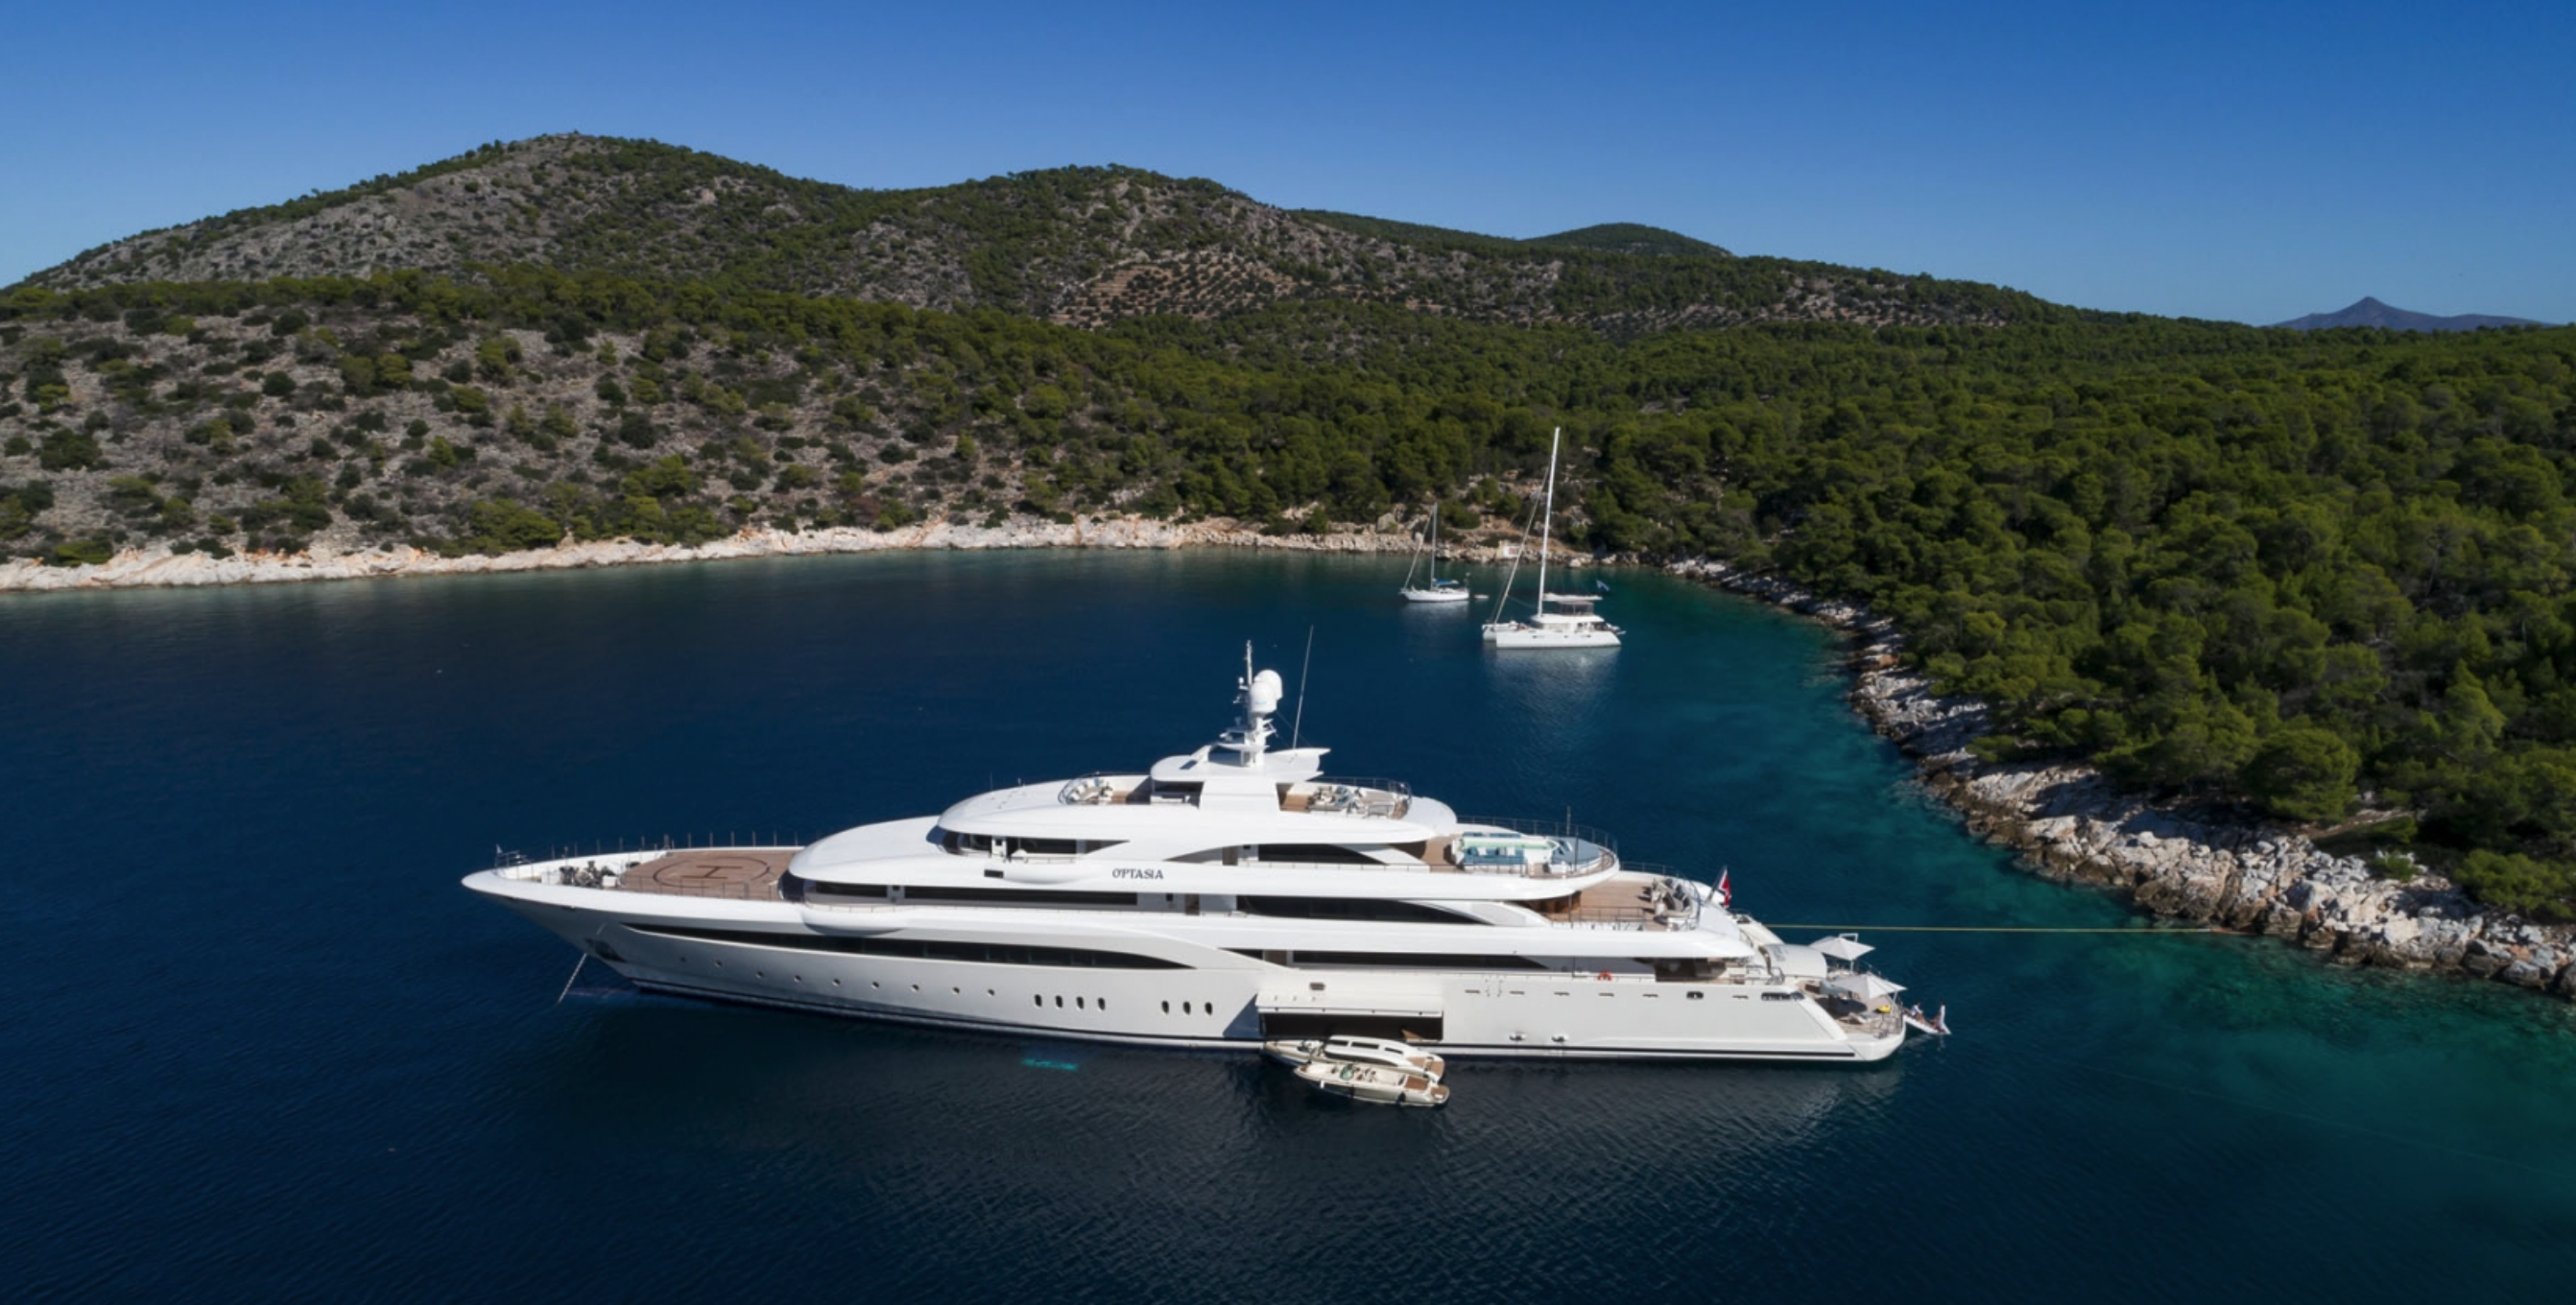 O’Ptasia - Yacht Charter Naxos & Boat hire in East Mediterranean 1